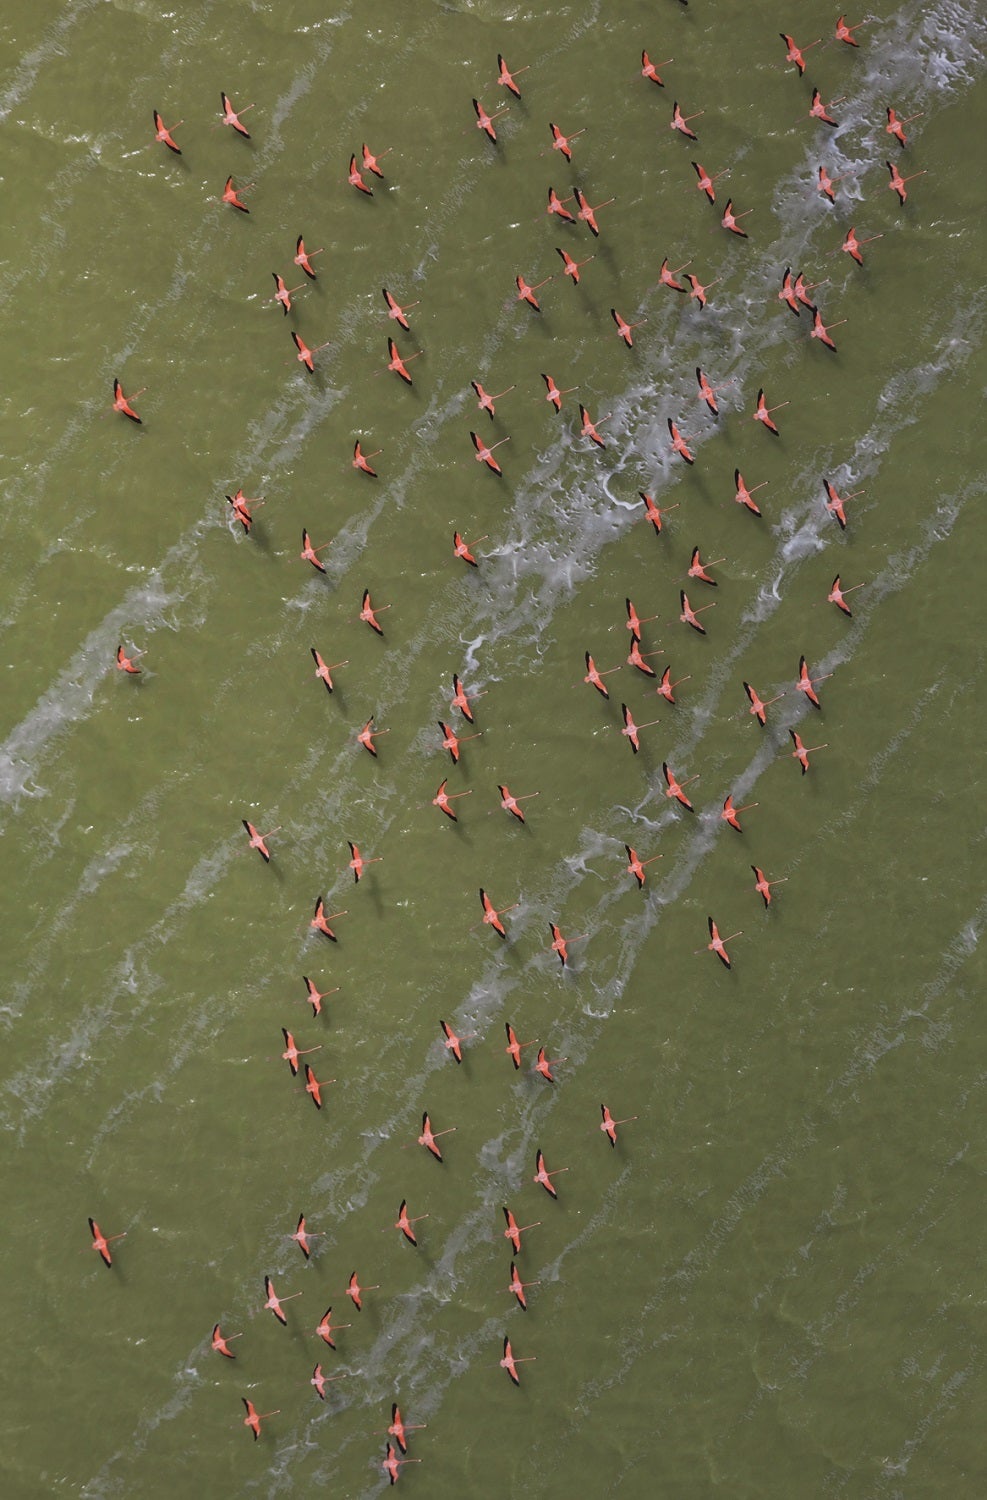 Adult Caribbean flamingos in the greenish waters of Mexico's Yucatan Peninsula seen from above